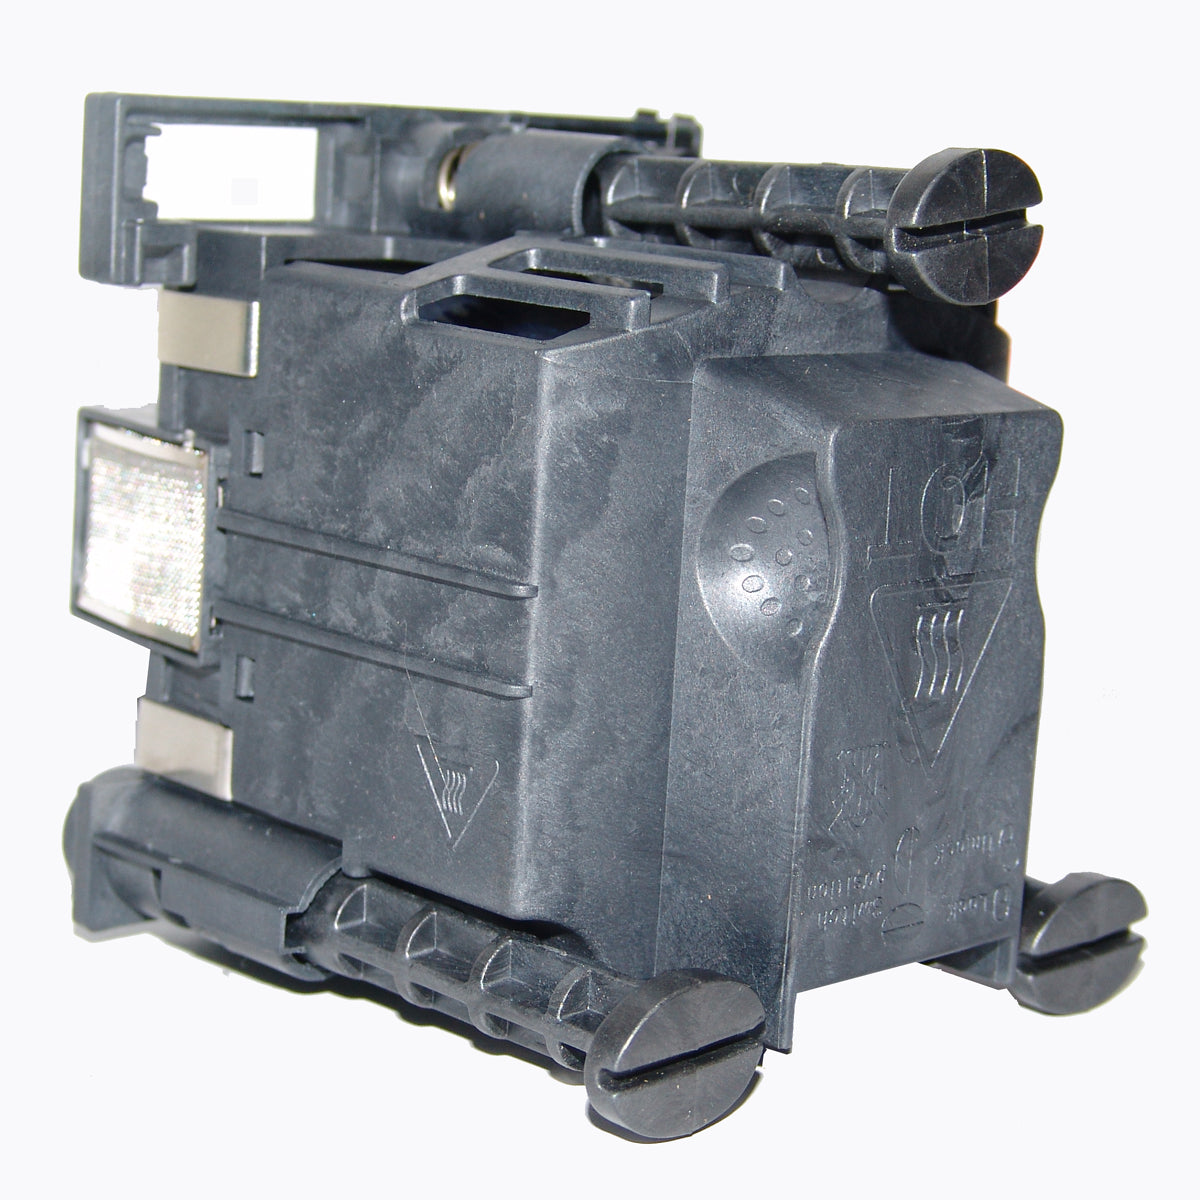 ProjectionDesign 400-0400-00 Compatible Projector Lamp Module